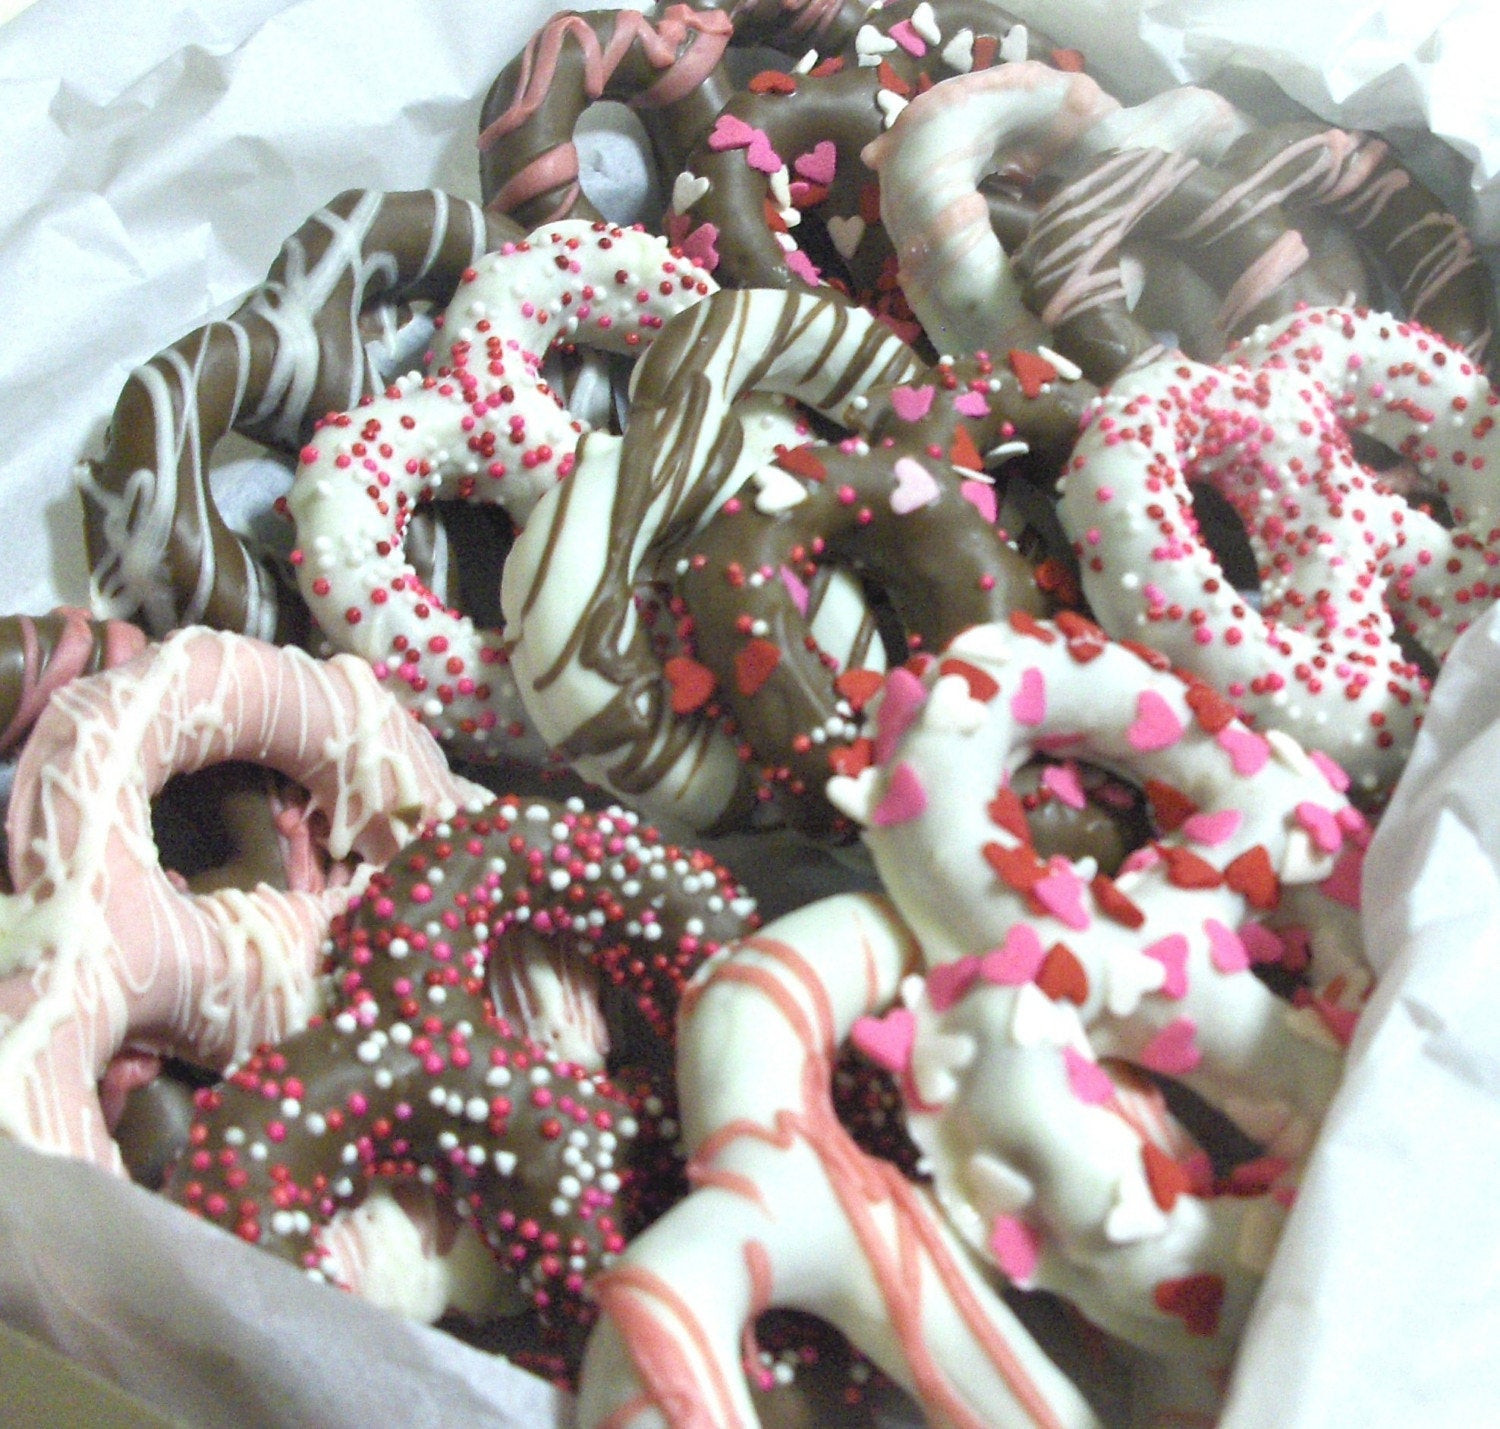 Chocolate Covered Pretzels For Valentines Day
 VALENTINE CANDY Chocolate covered pretzels by FuzzyButtFarm